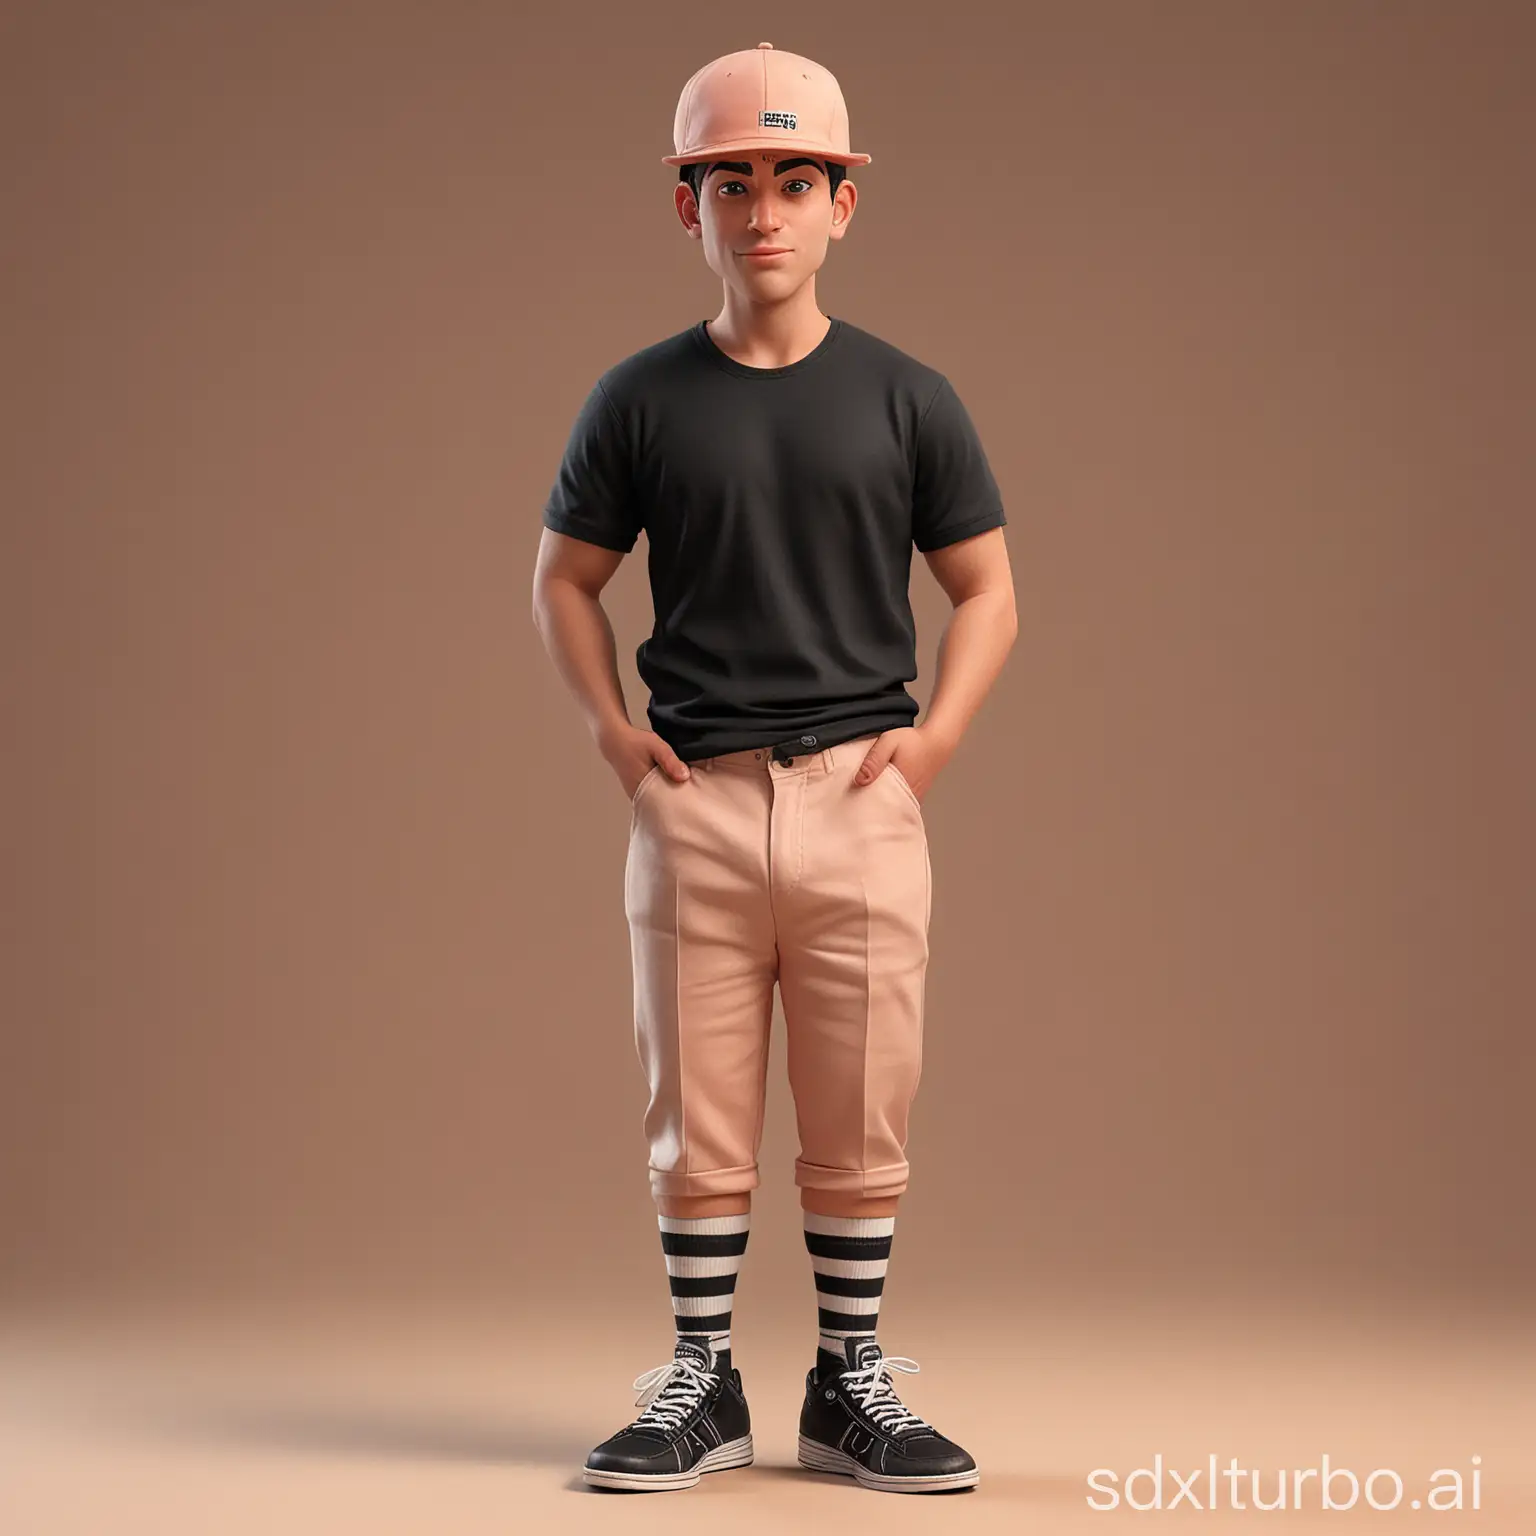 Confident-Young-Man-in-Stylish-Black-Outfit-Standing-Proudly-Realistic-Caricature-3D-Cartoon